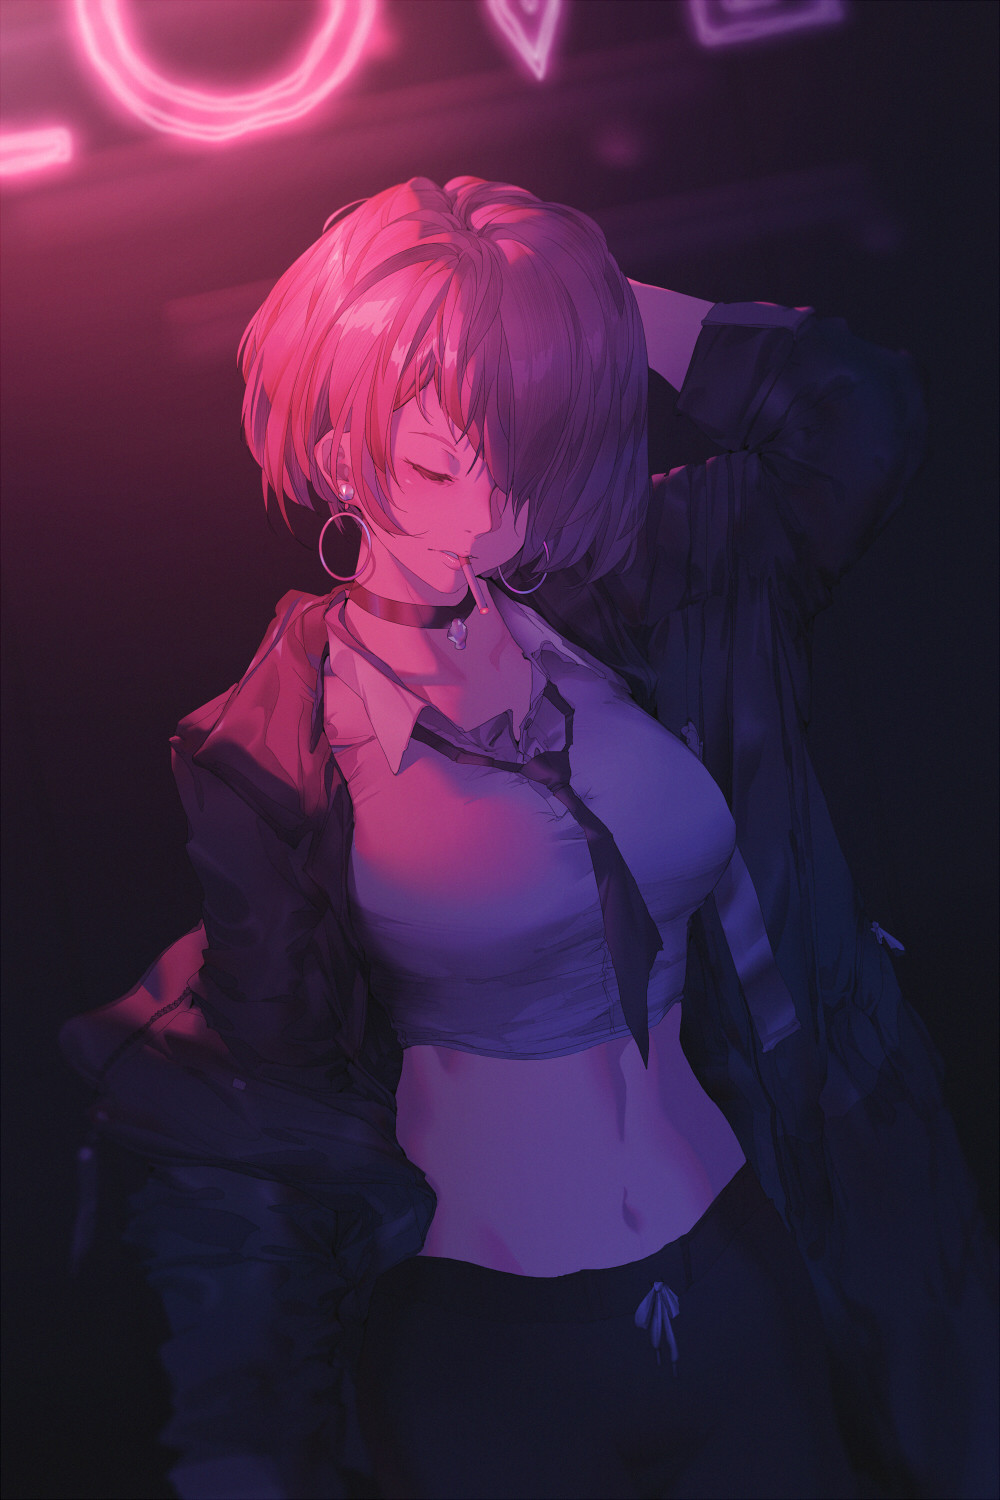 Neon Choker Short Hair Arms Up Tie Earring Jacket Anime Necktie Smoking Cigarettes Hand On Head Clos 1000x1500